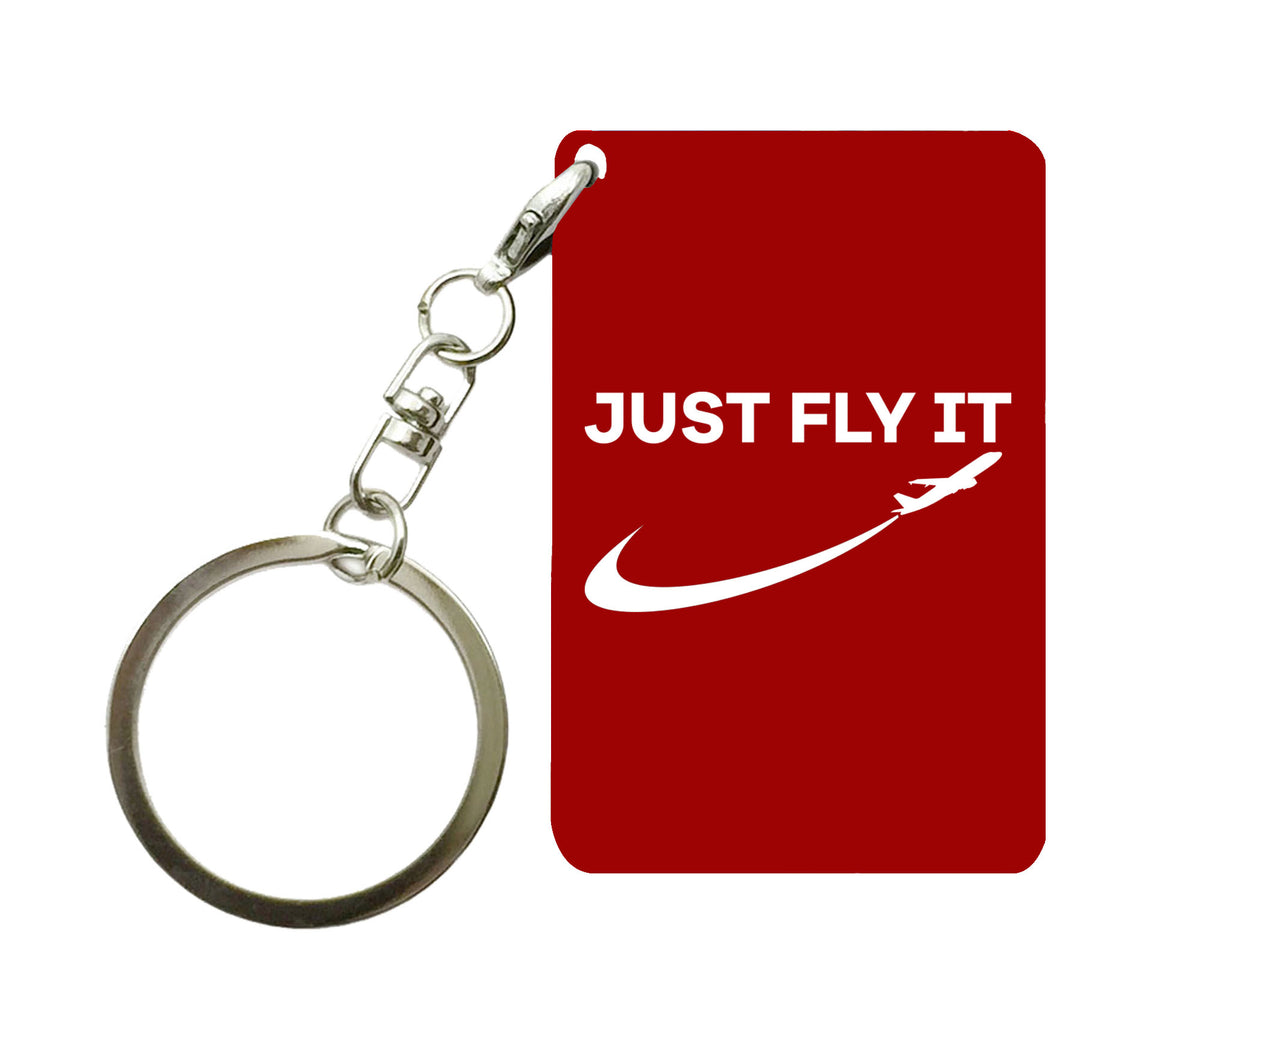 Just Fly It 2 Designed Key Chains